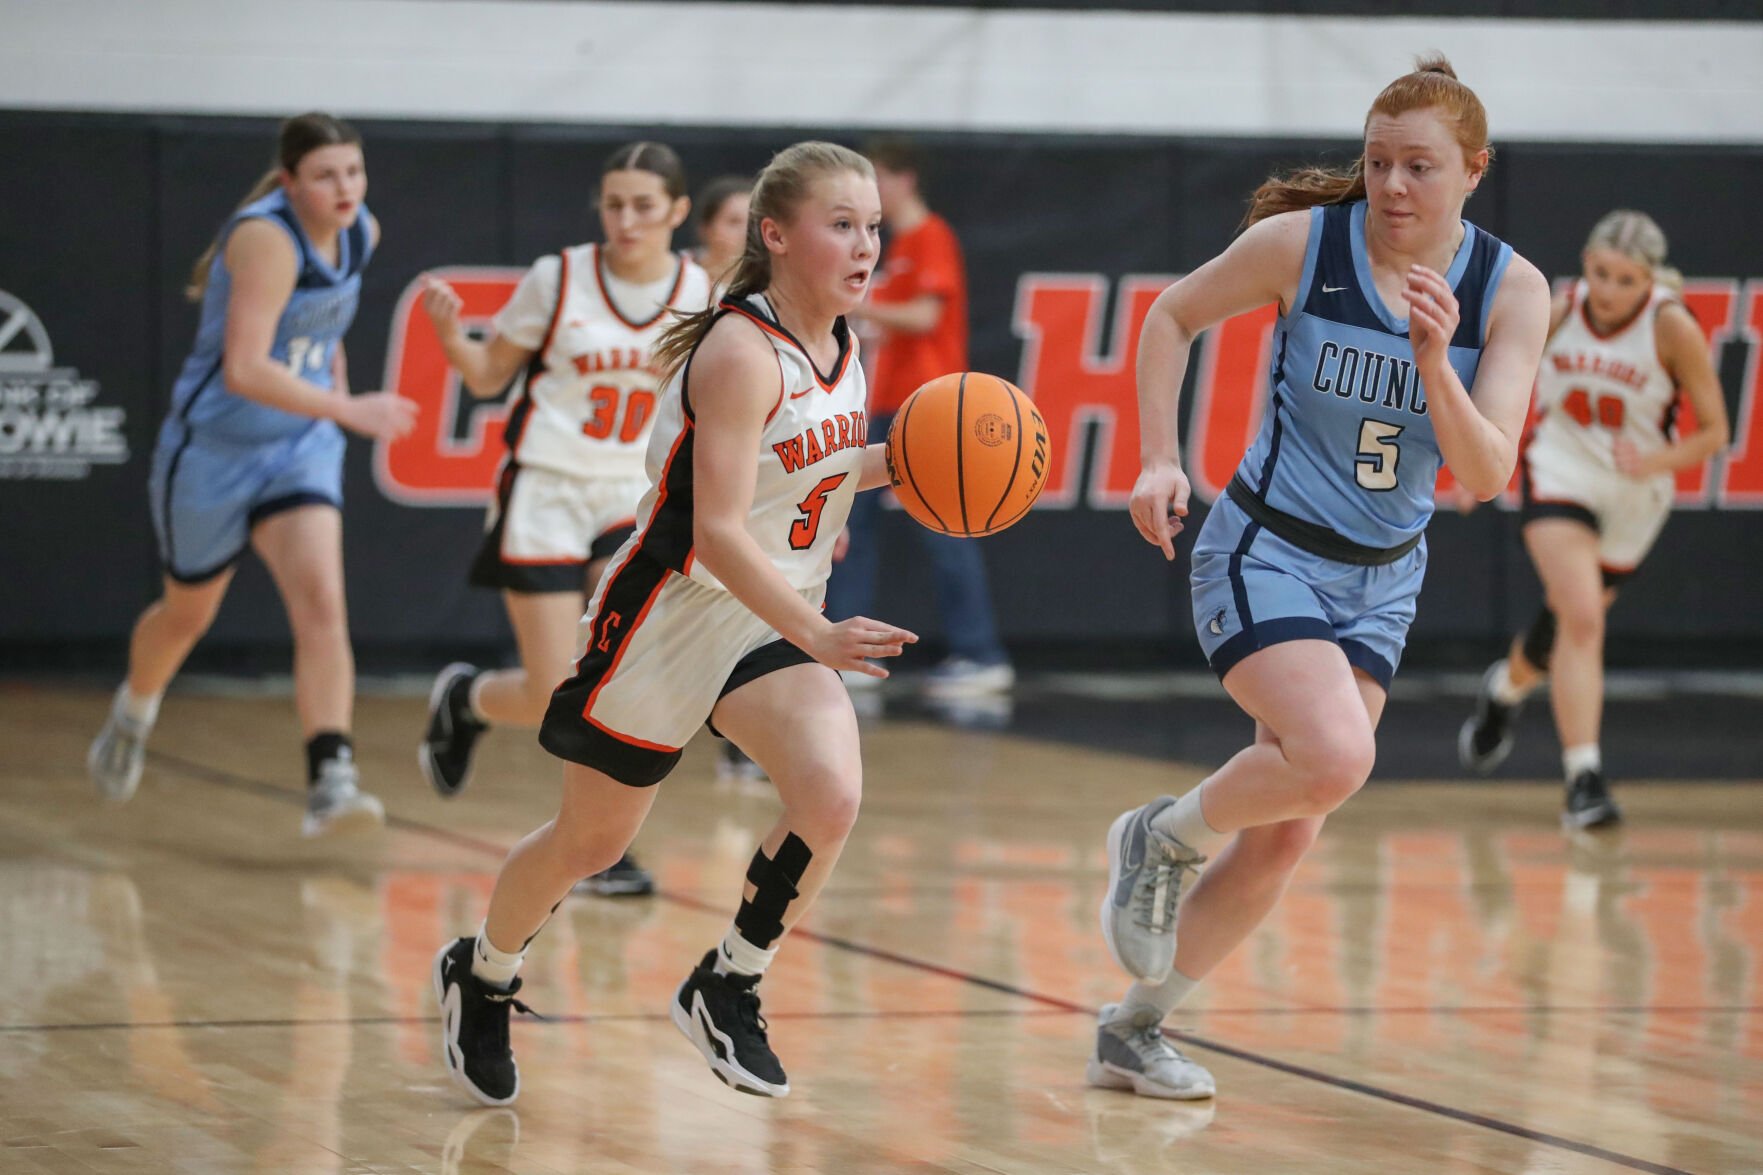 Payton Hester Leads Chilhowie Warriors to Victory in Region 1D Girls Playoff Game